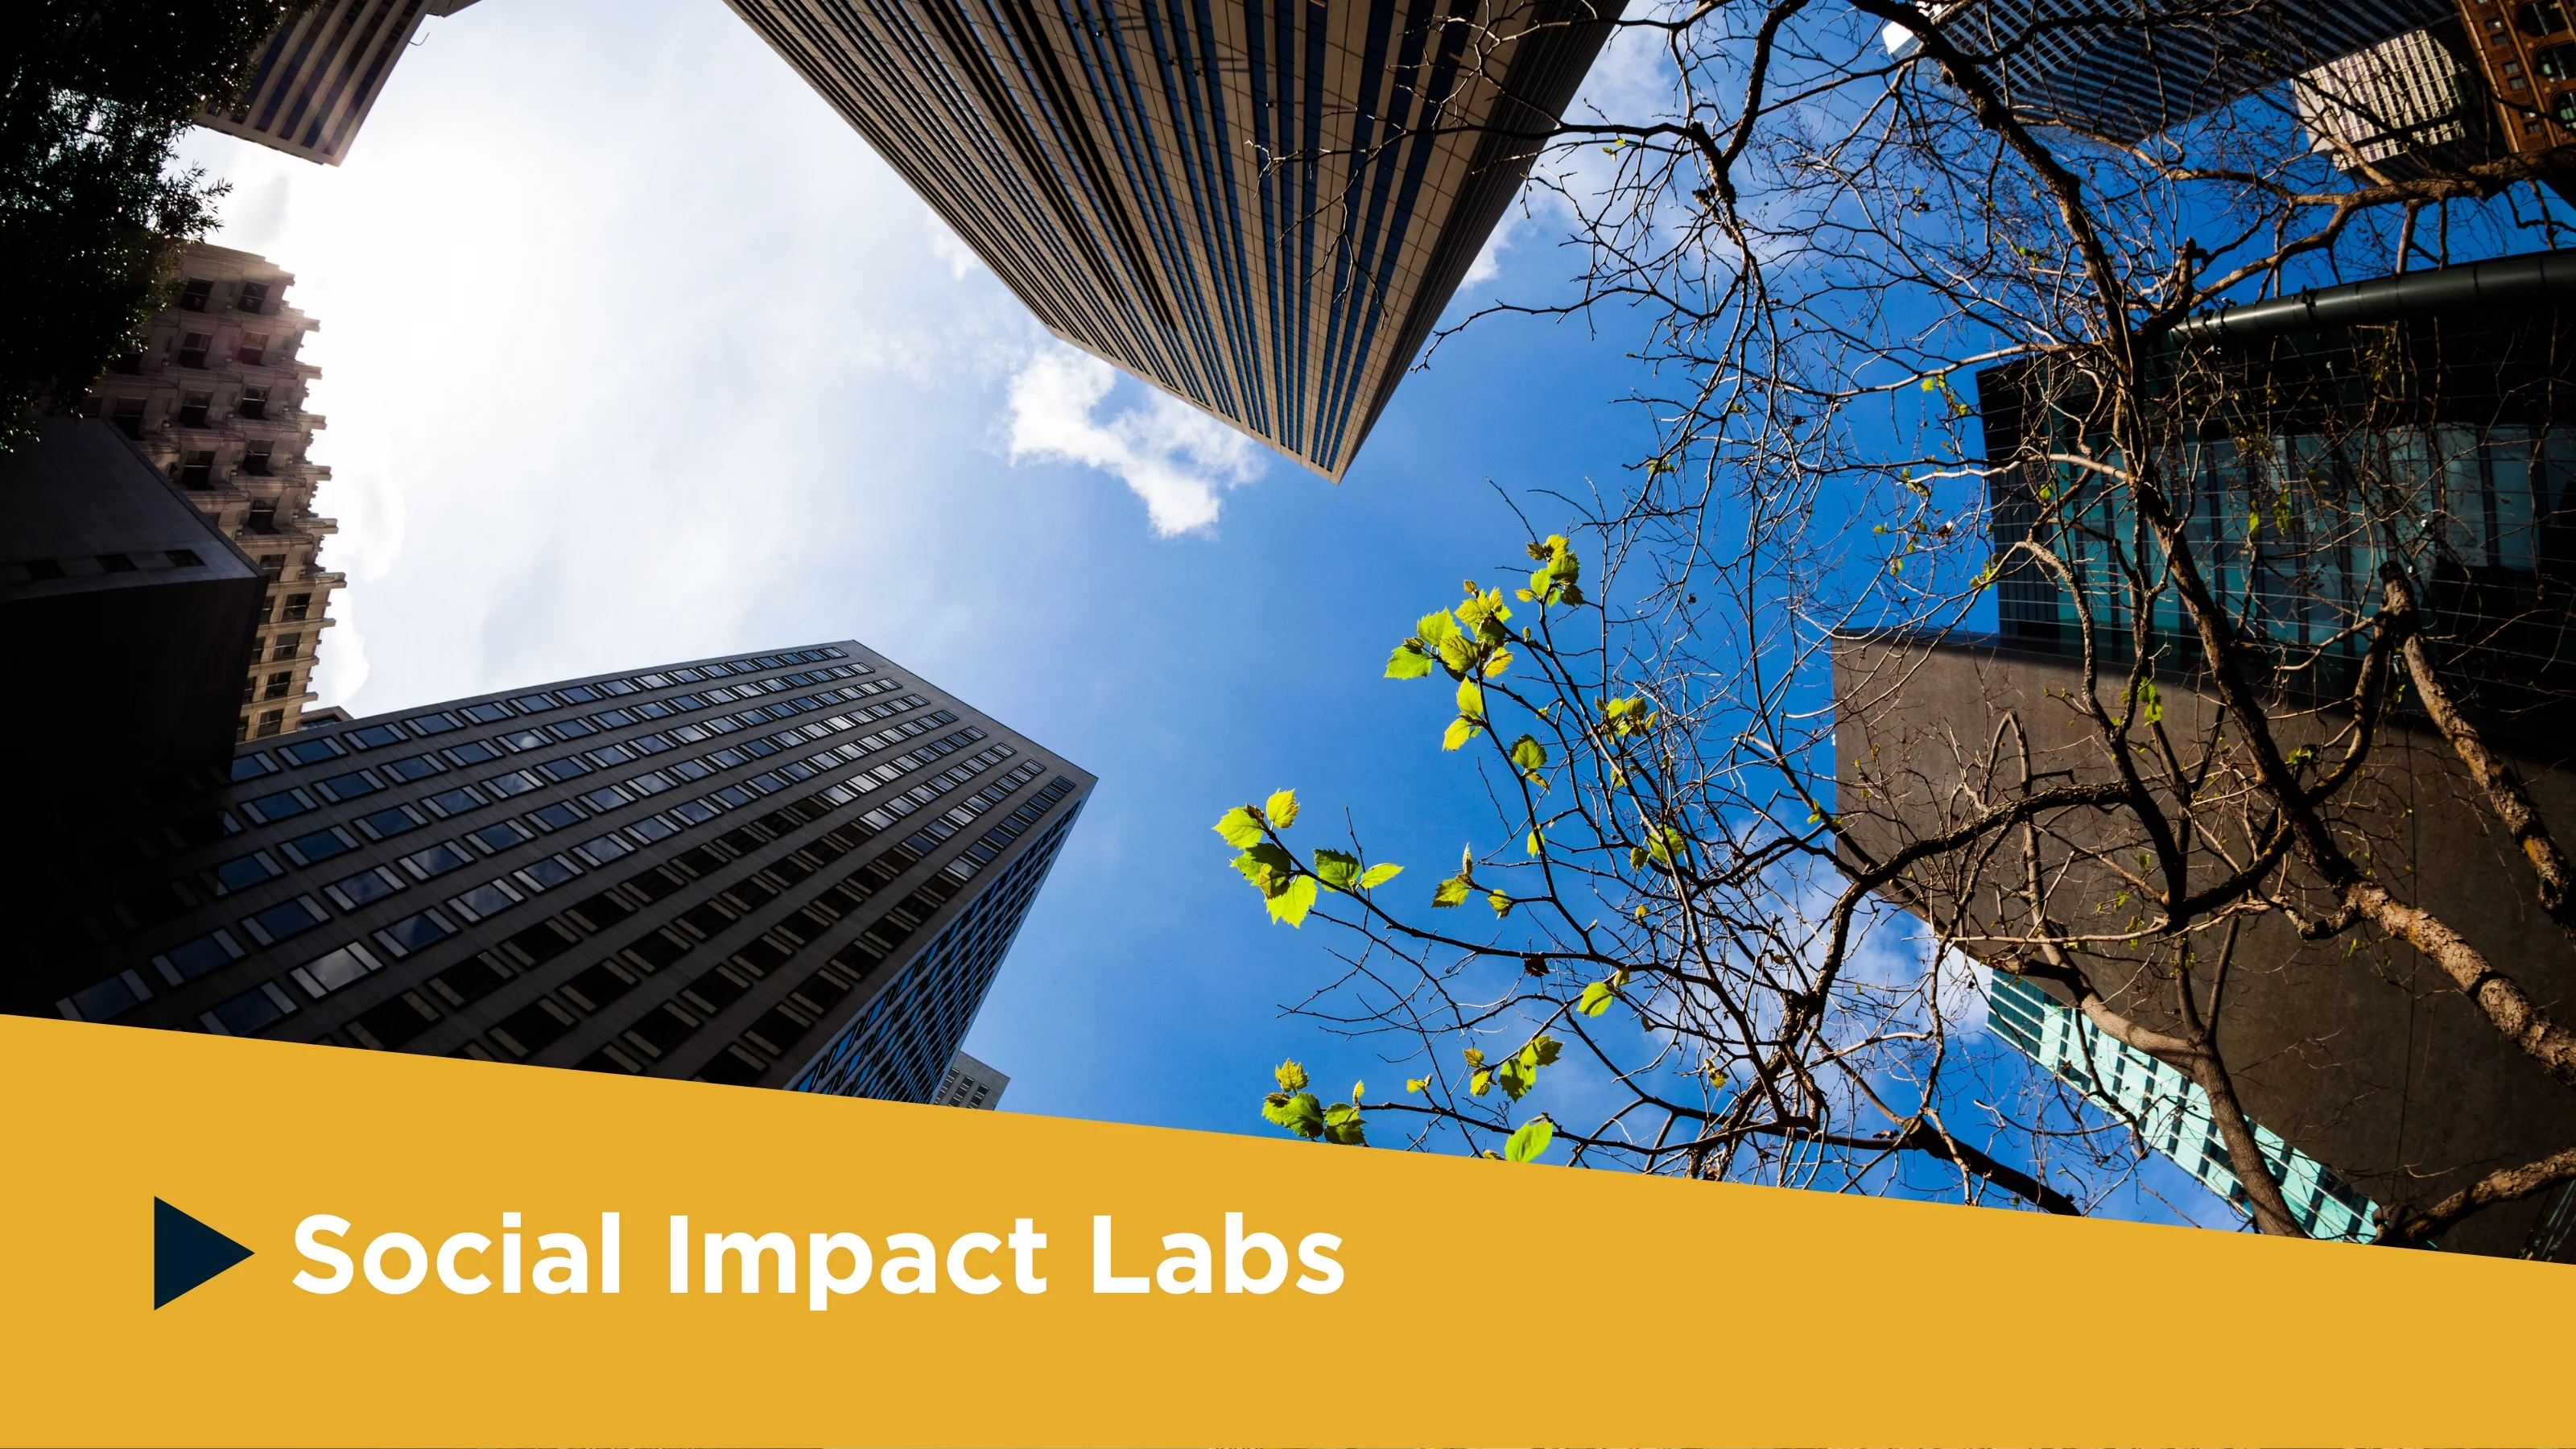 Photograph of city skyscrapers from the ground level, pointing upward. Blue sky in the background and a tree in the foreground. Yellow bar at the bottom reads "Social Impact Labs" with a navy triangle pointing right,